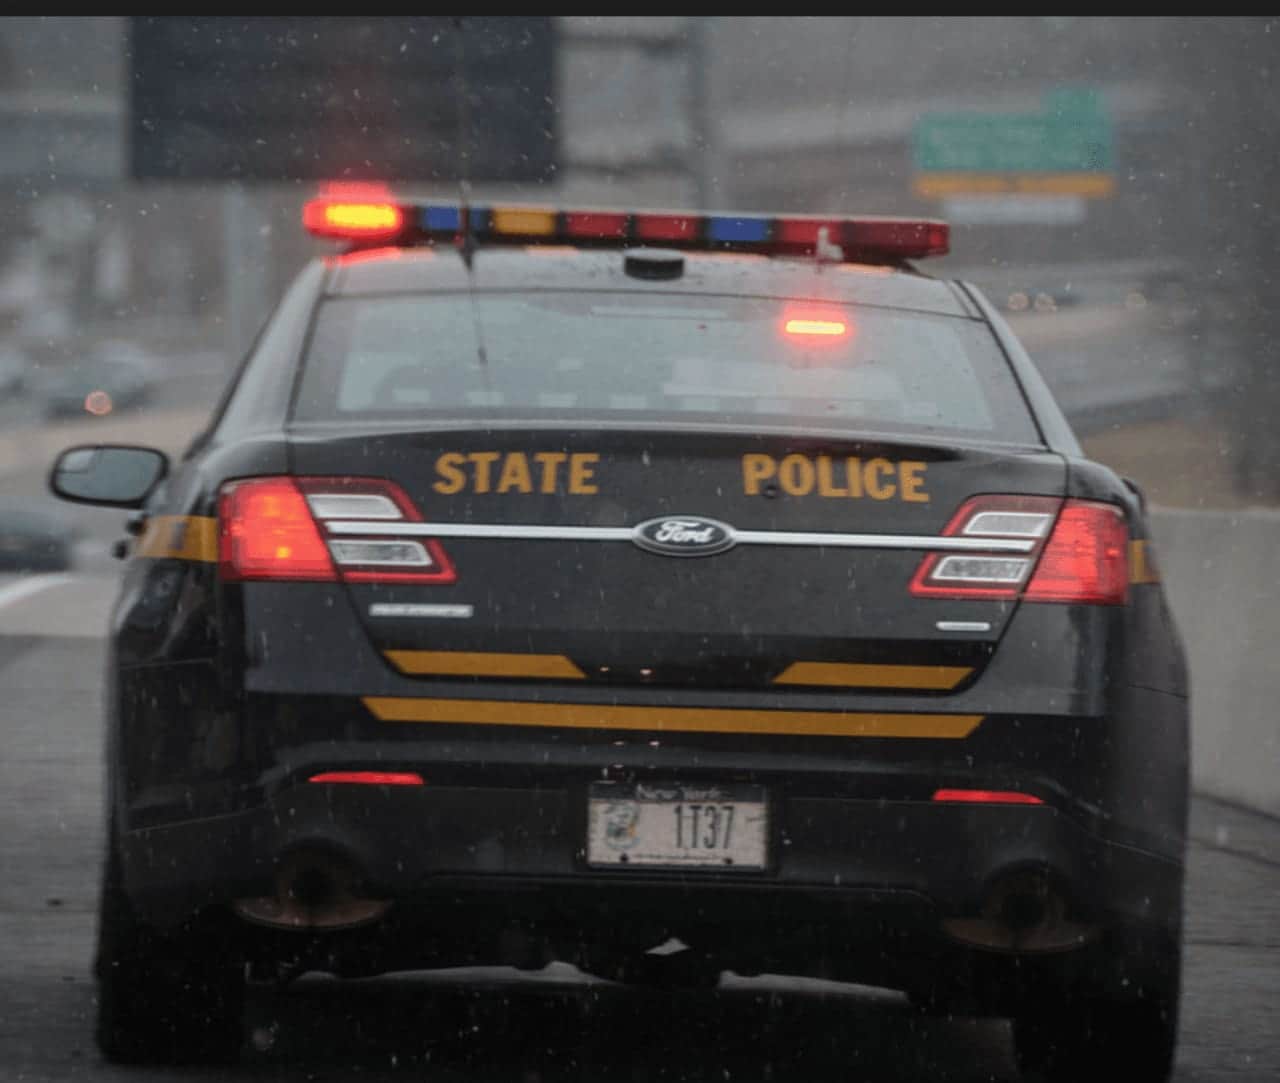 state police made the DWI arrests between Friday, Nov. 18 and Sunday, Nov. 20.